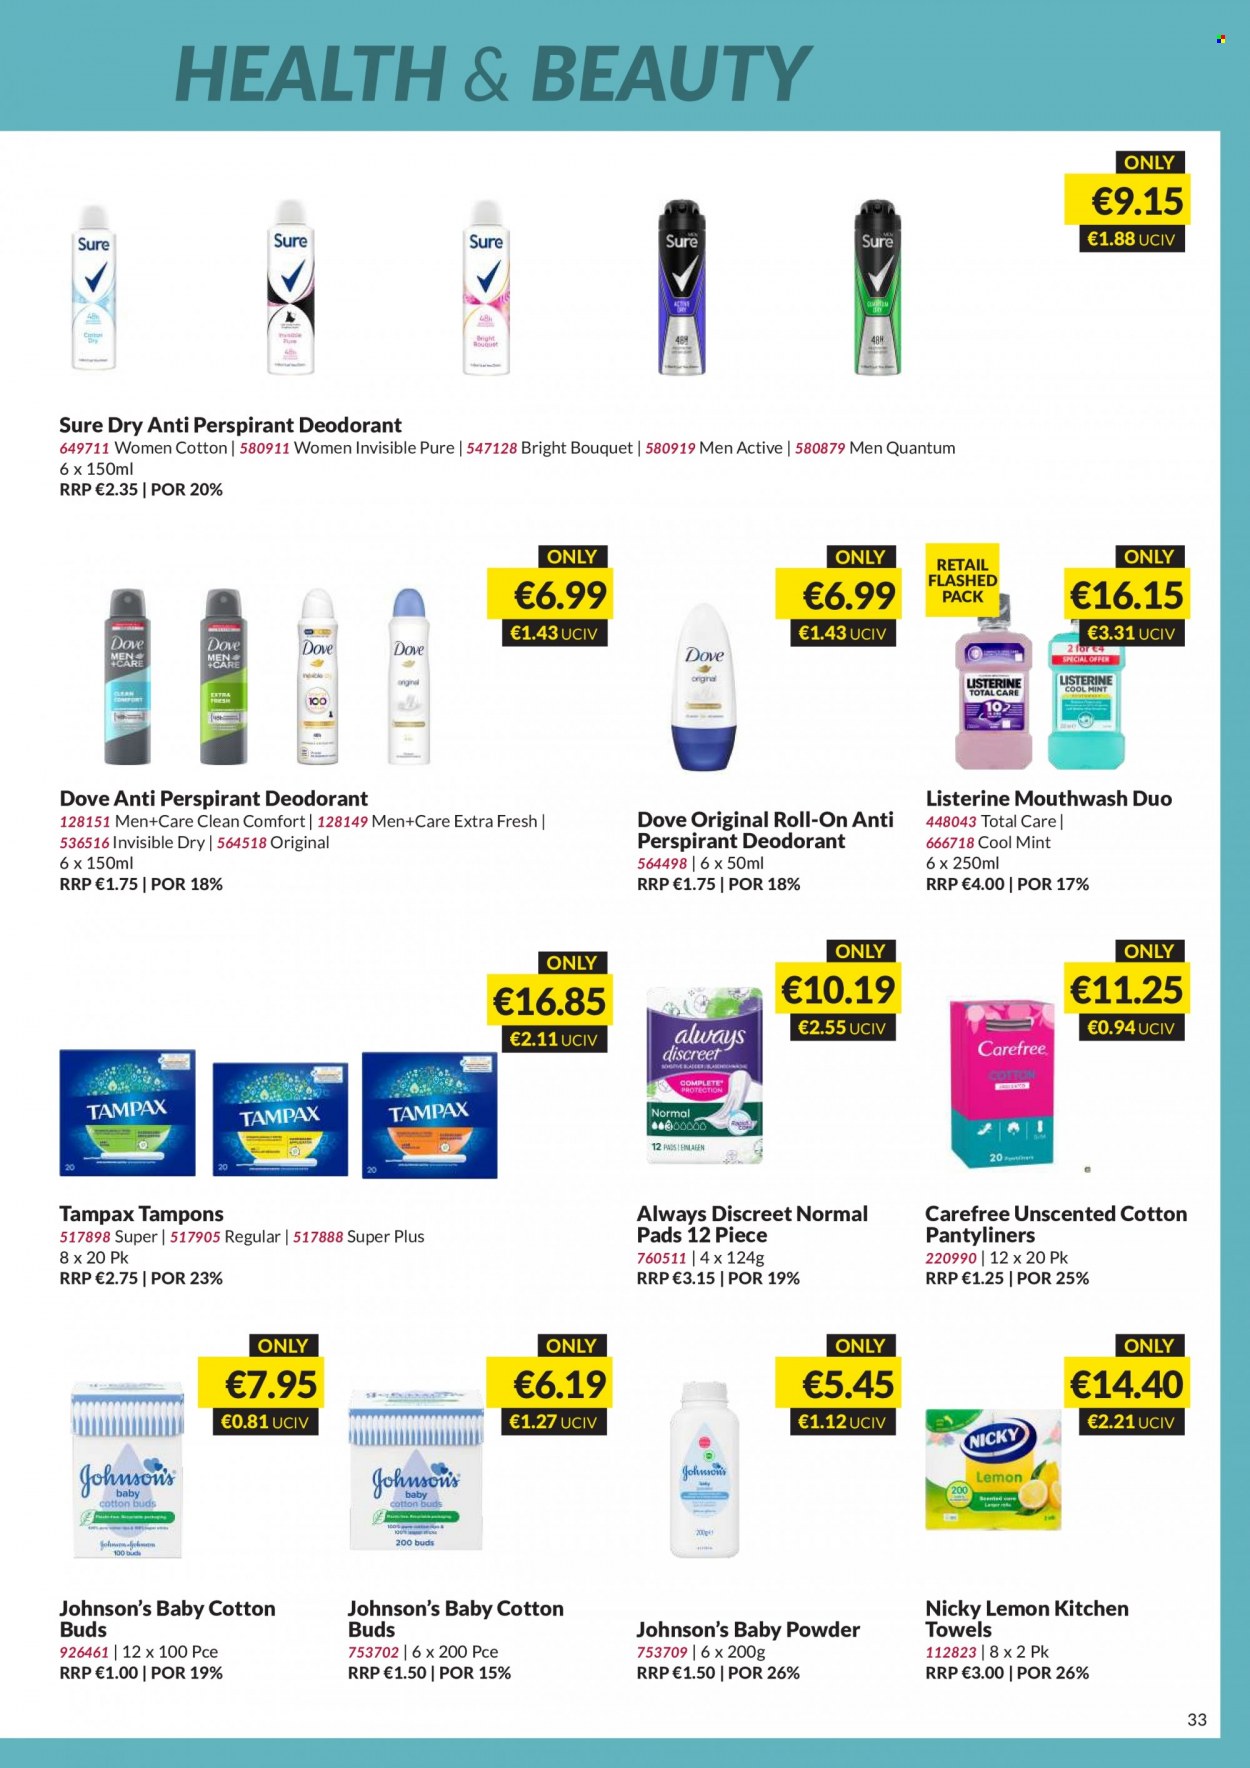 thumbnail - MUSGRAVE Market Place offer  - 22.01.2023 - 11.02.2023 - Sales products - Dove, Johnson's, baby powder, kitchen towels, Listerine, mouthwash, Tampax, Always Discreet, Carefree, pantyliners, tampons, anti-perspirant, roll-on, Sure, deodorant, bouquet. Page 33.